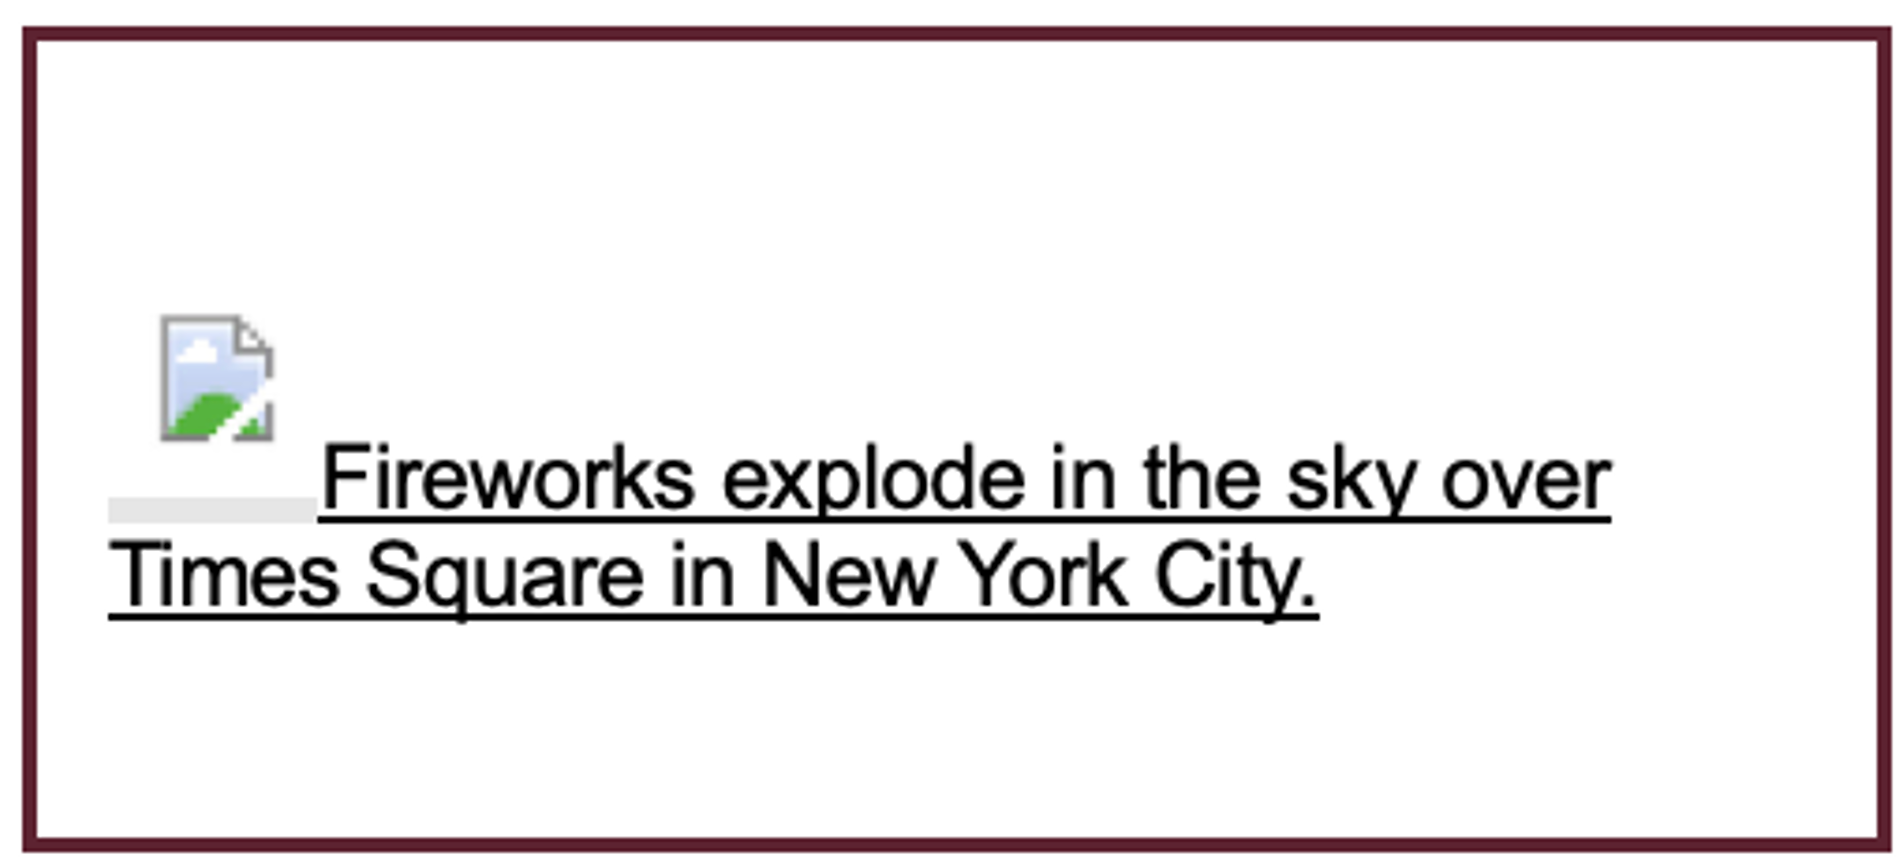 Screenshot of the place where an image should be with a small icon representing the image and the alt text “Fireworks explode in the sky over Times Square in New York City.”